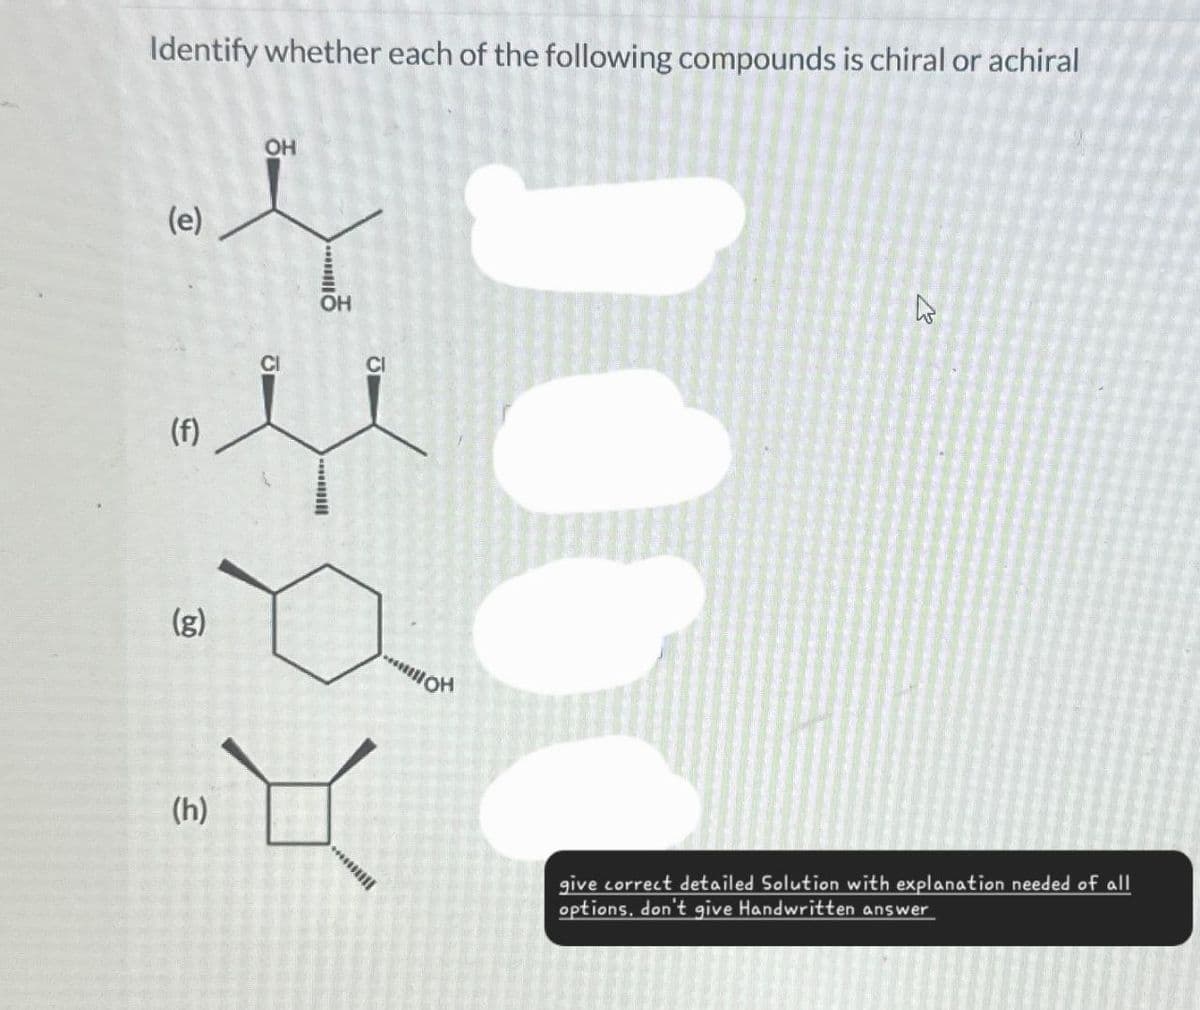 Identify whether each of the following compounds is chiral or achiral
(e)
(f)
OH
༥. ན་
OH
མ།།
(g)
(h)
K
13
give correct detailed Solution with explanation needed of all
options, don't give Handwritten answer